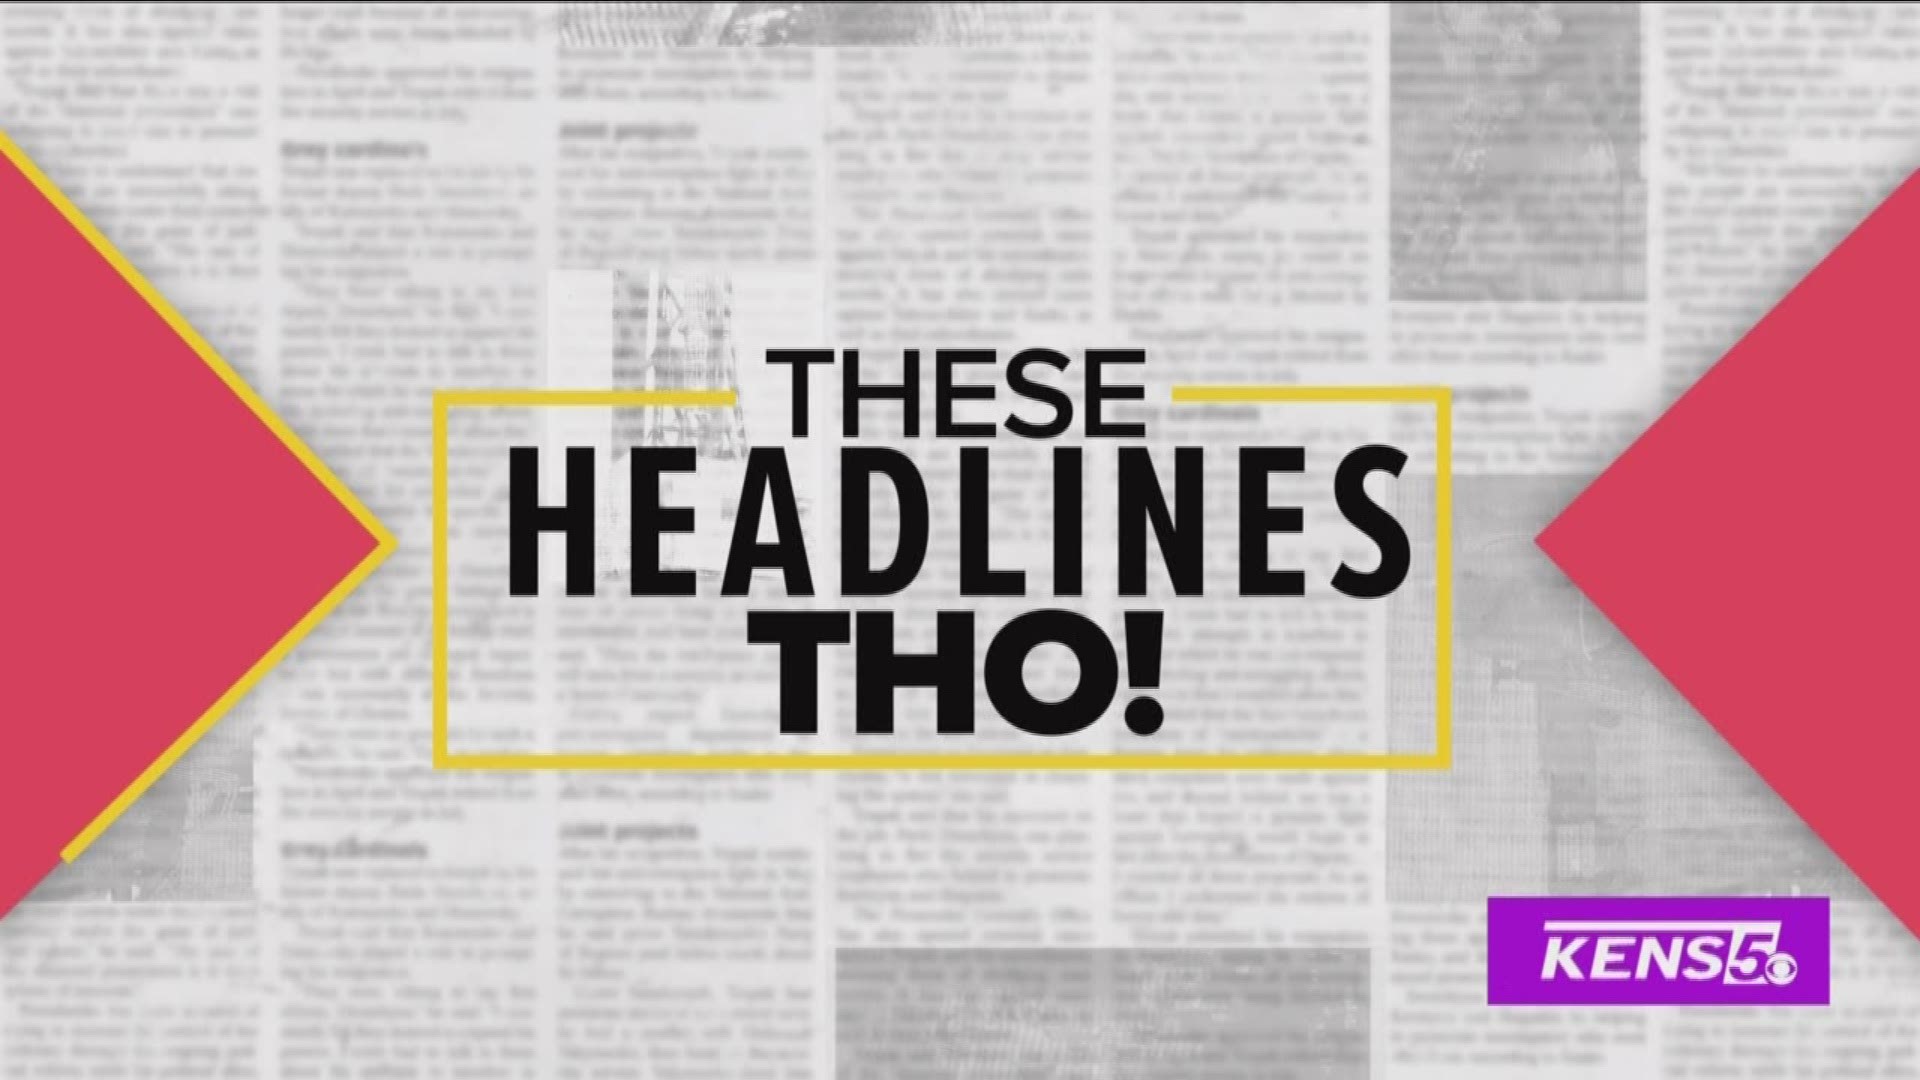 Brandon Roddy shares some unique headlines that made the news sure to make you laugh